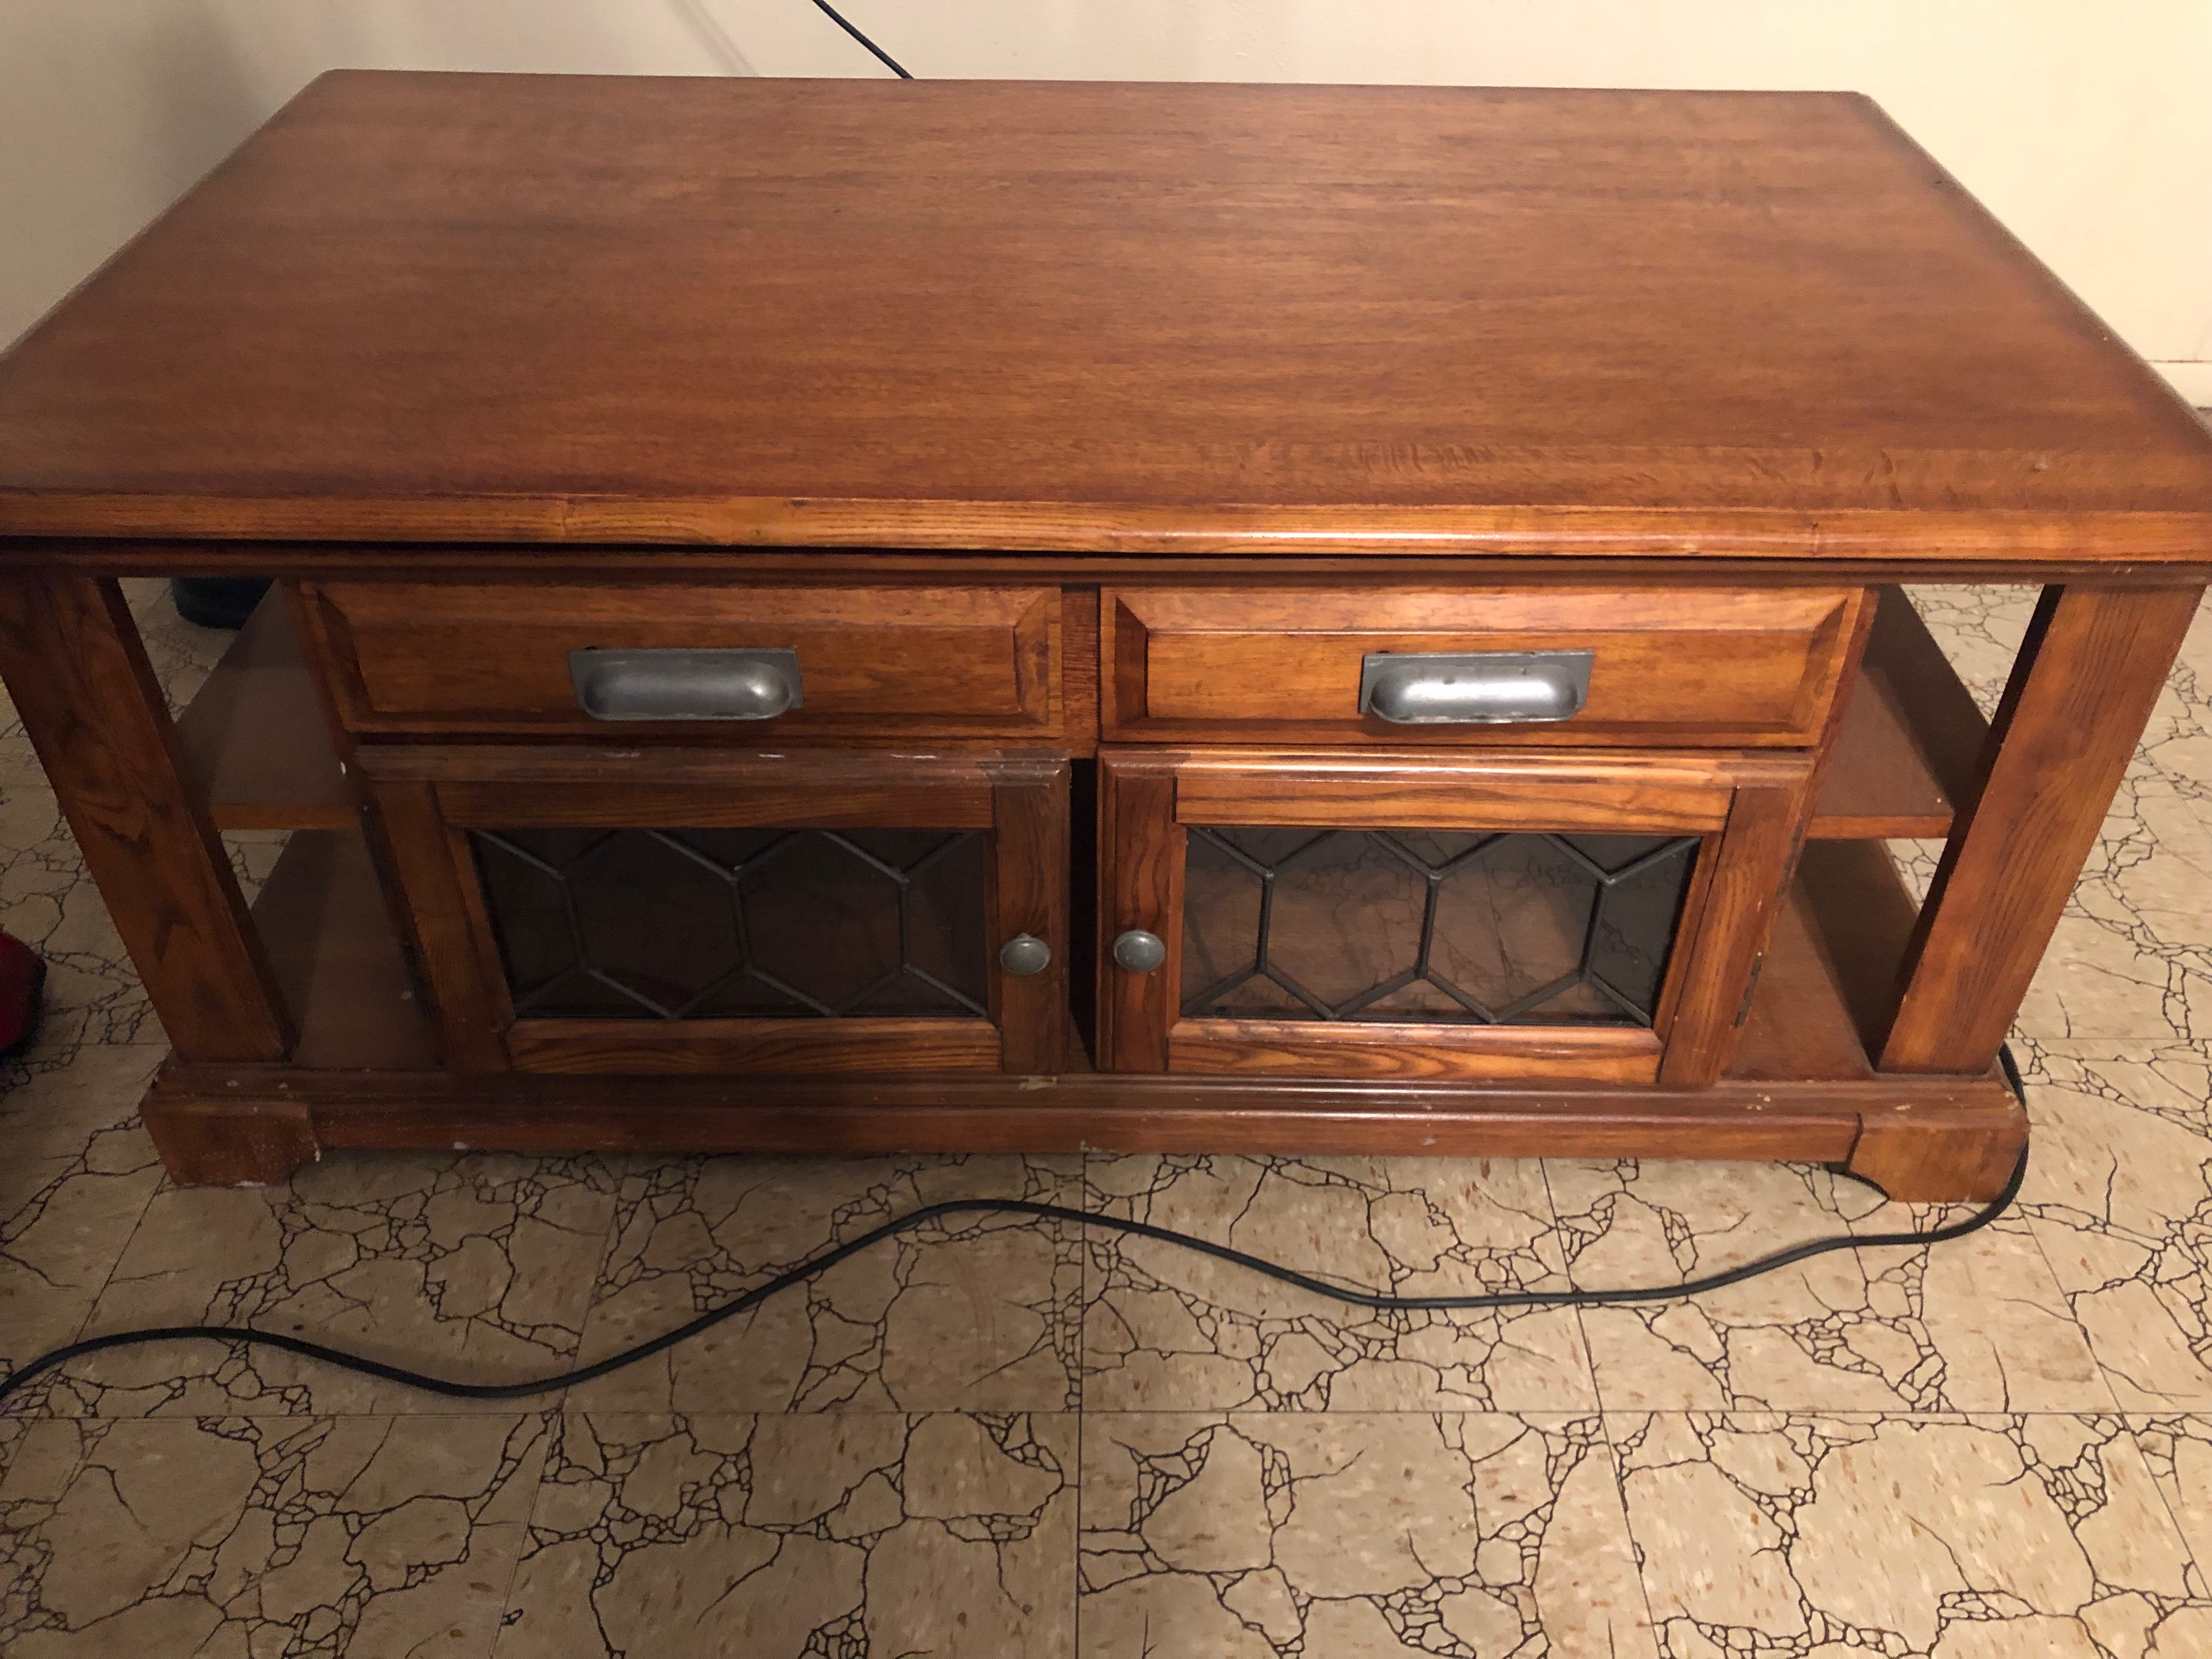 Vintage wooden coffetable with lift top